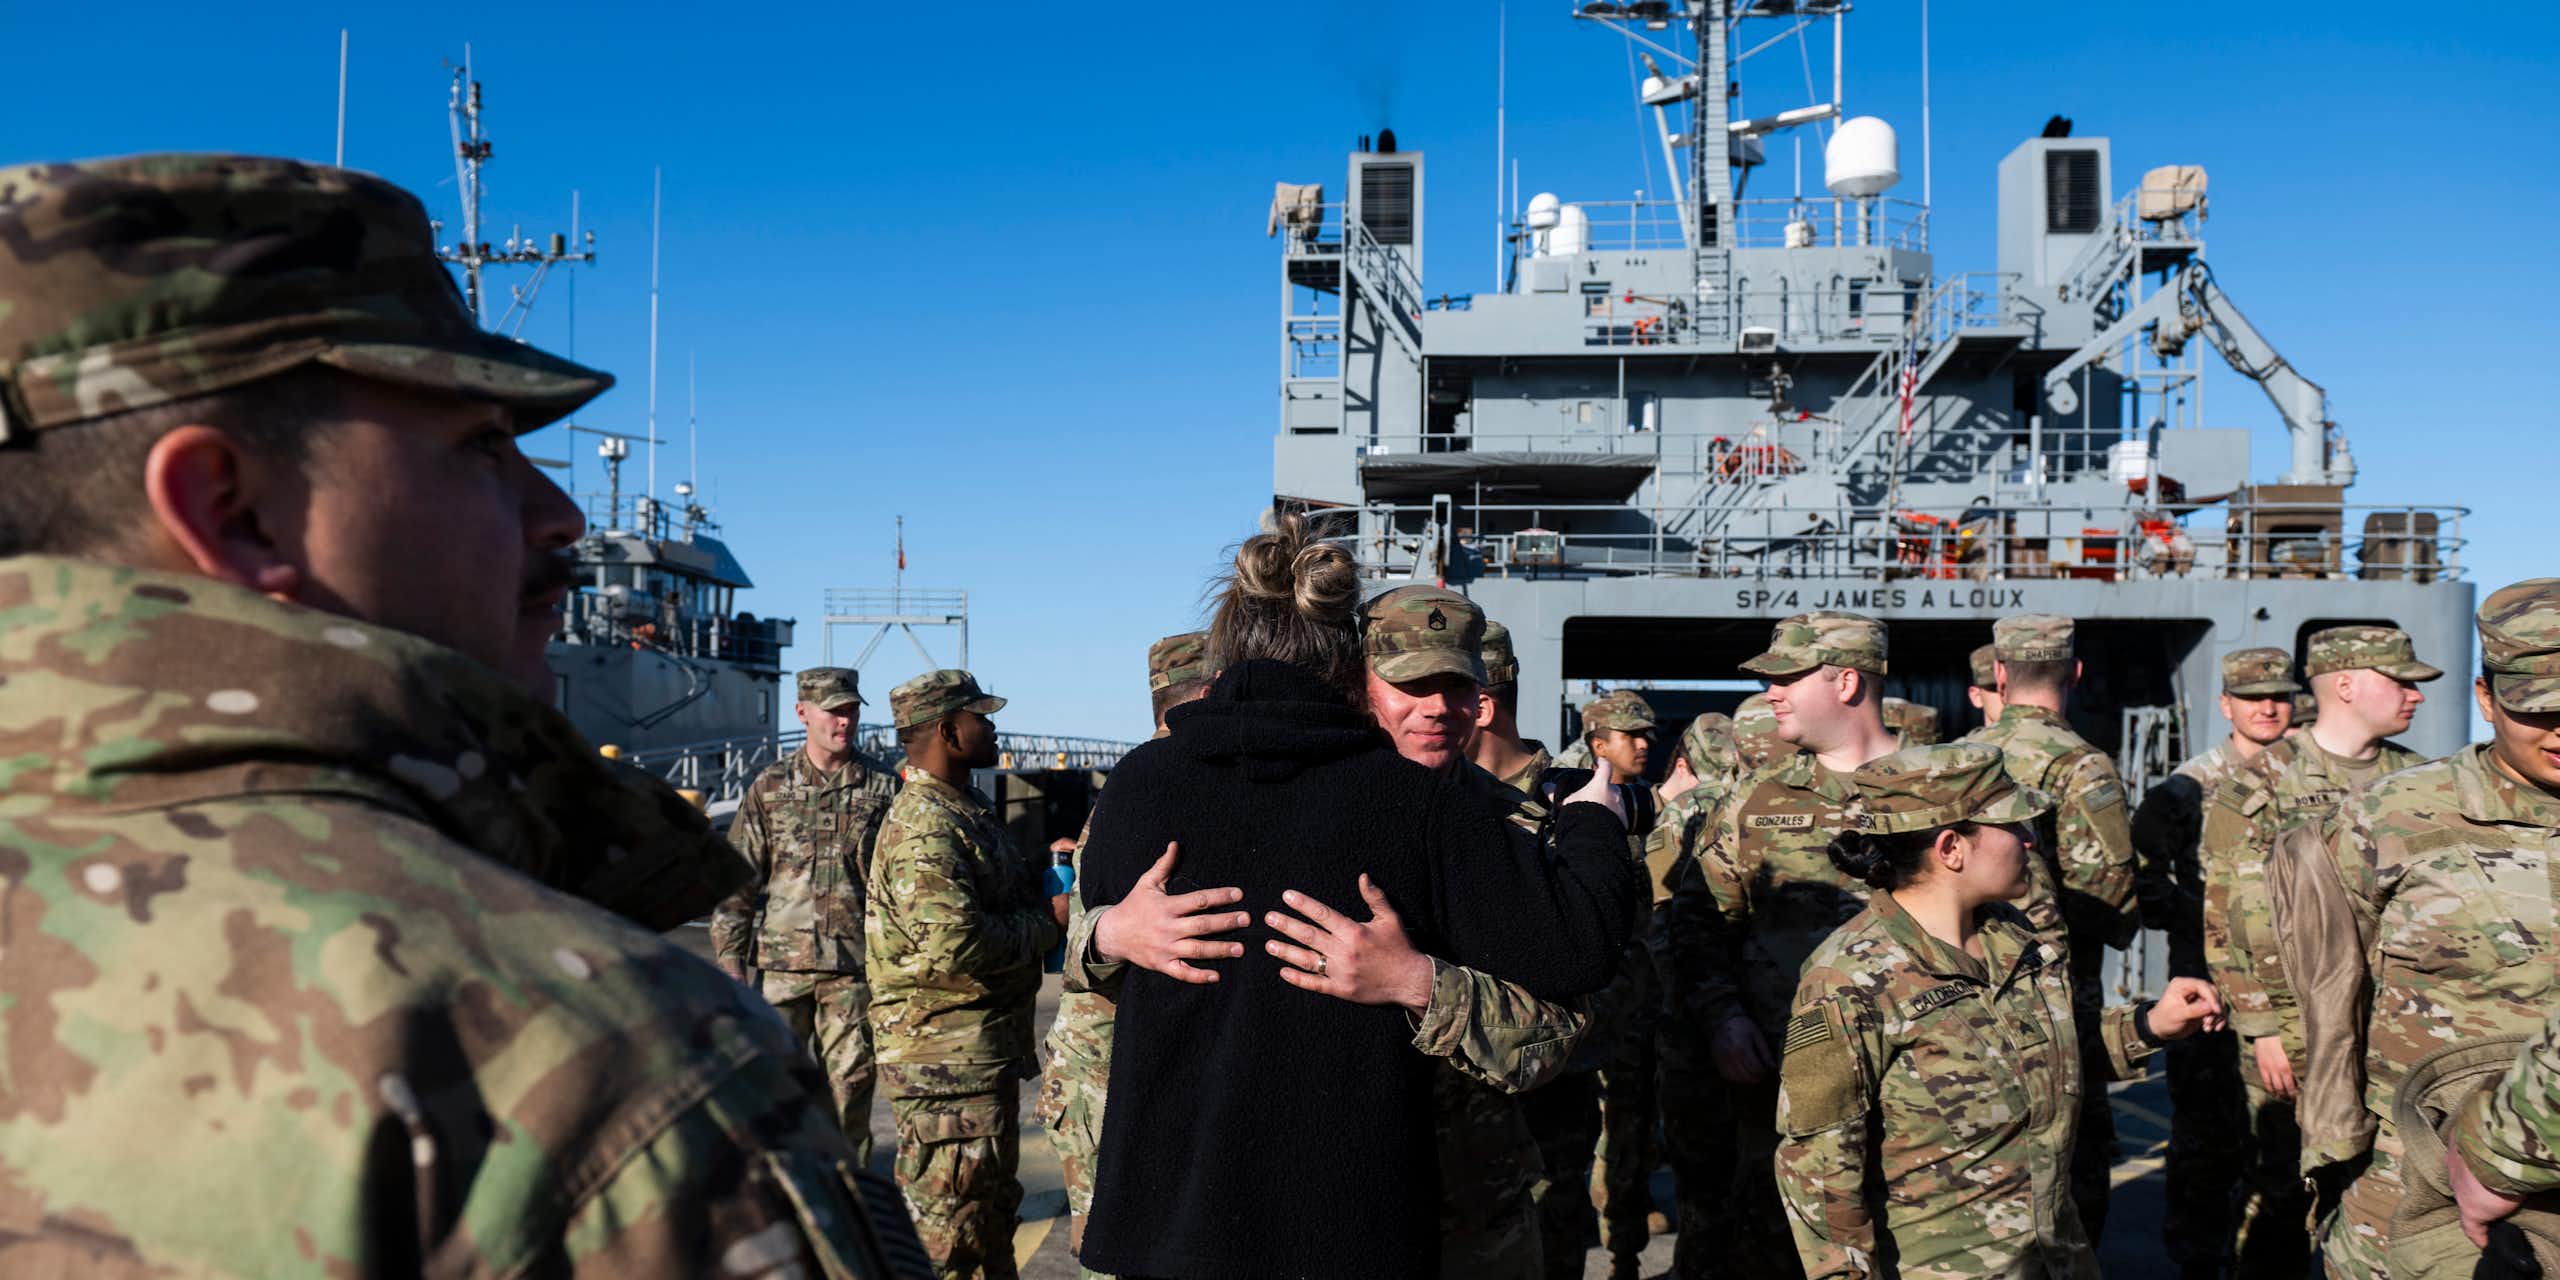 Men and women in fatigues embrace on a military ship.